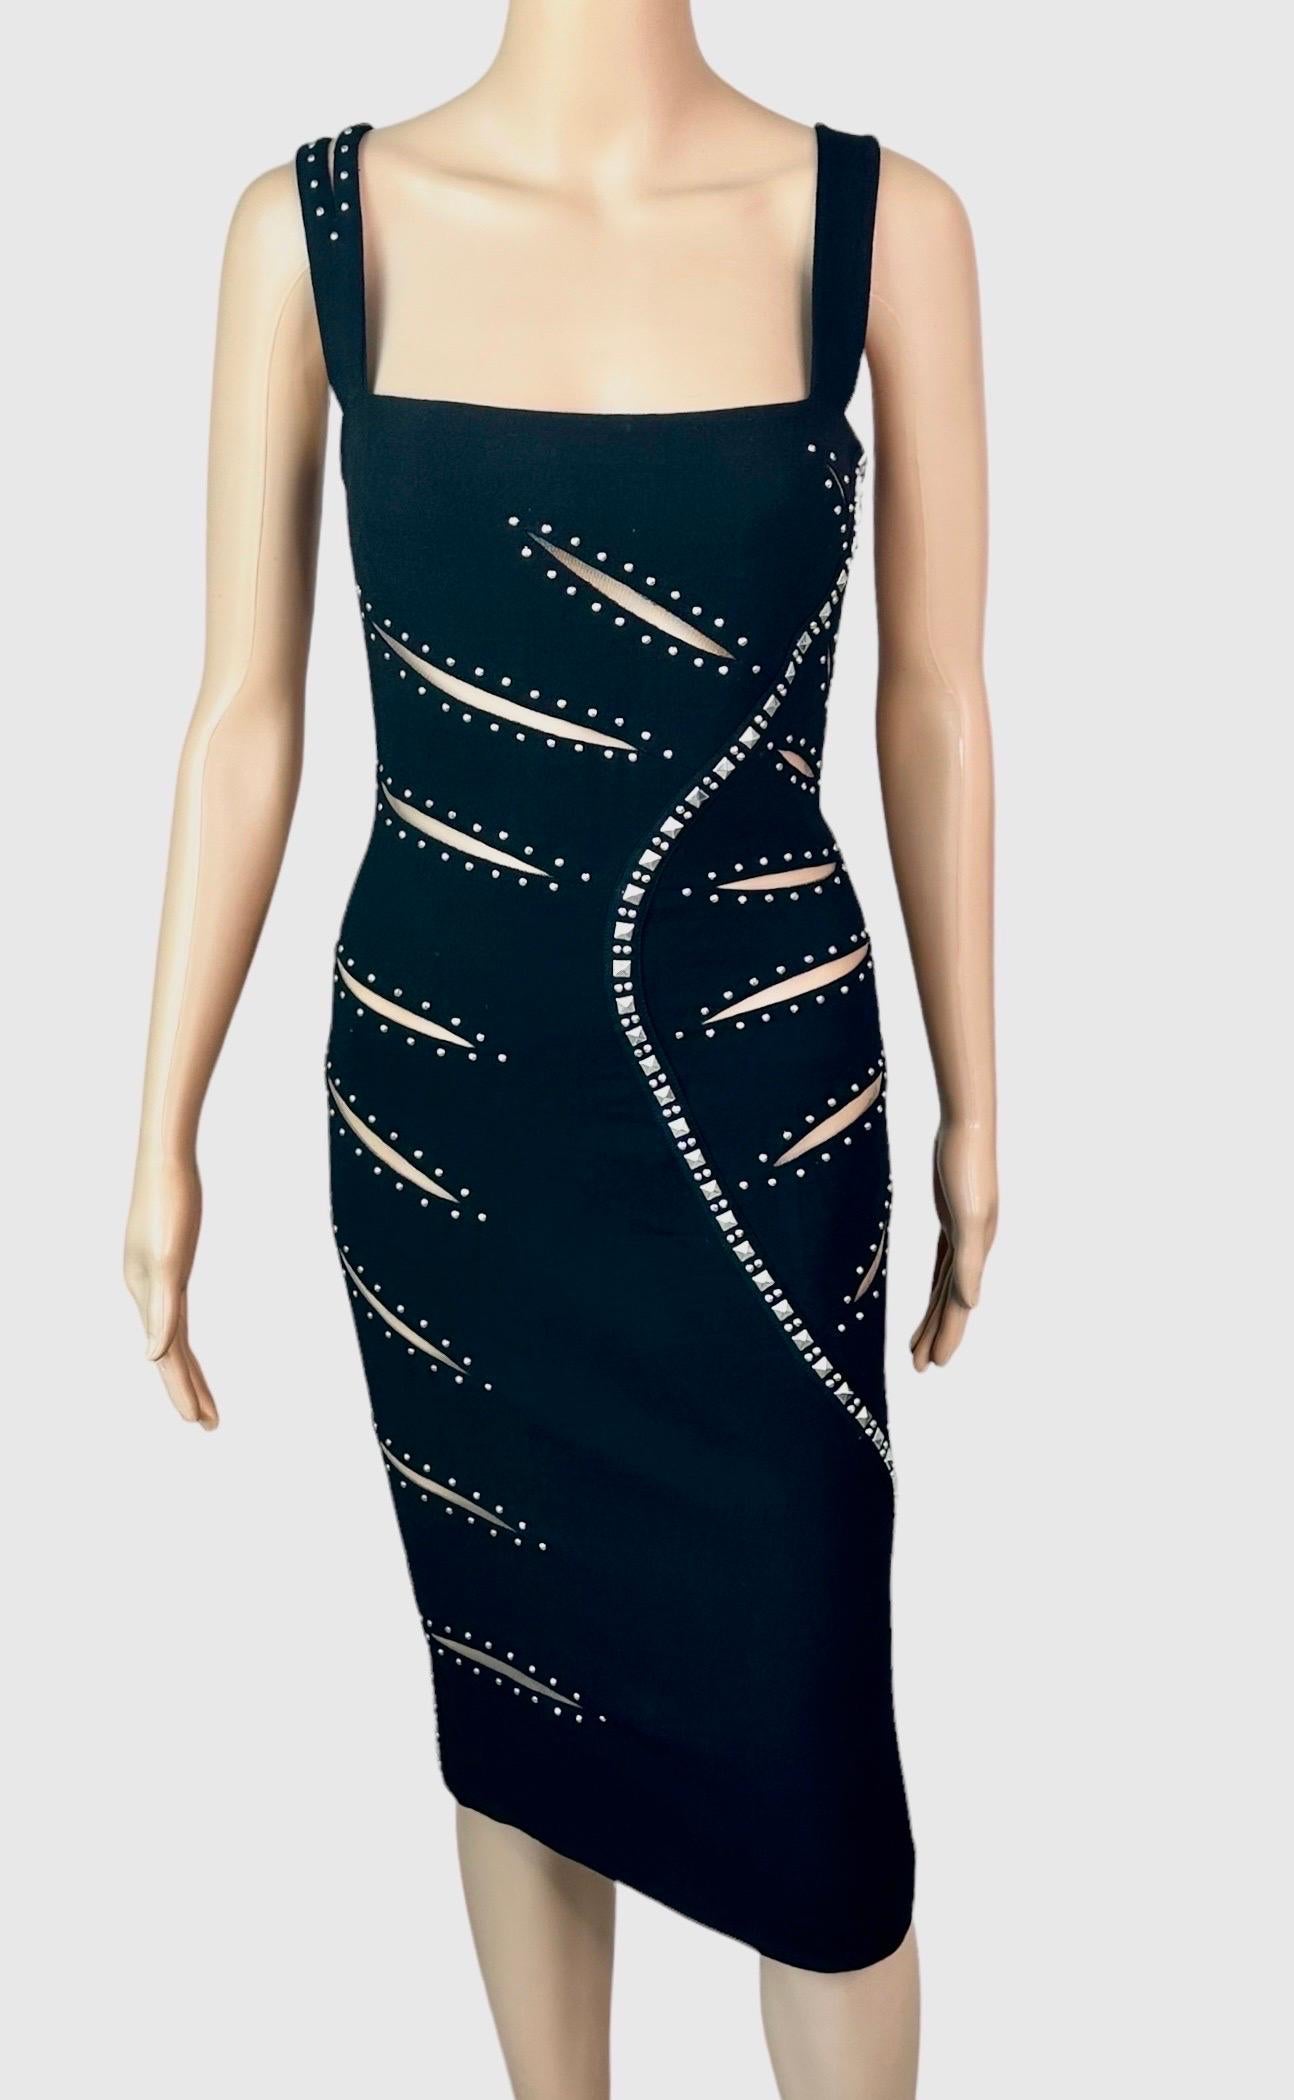 Versace F/W 2004 Runway Embellished Cutout Sheer Mesh Panels Studded Detail Evening Dress IT 42

Look 37 from the Fall 2004 Collection.




